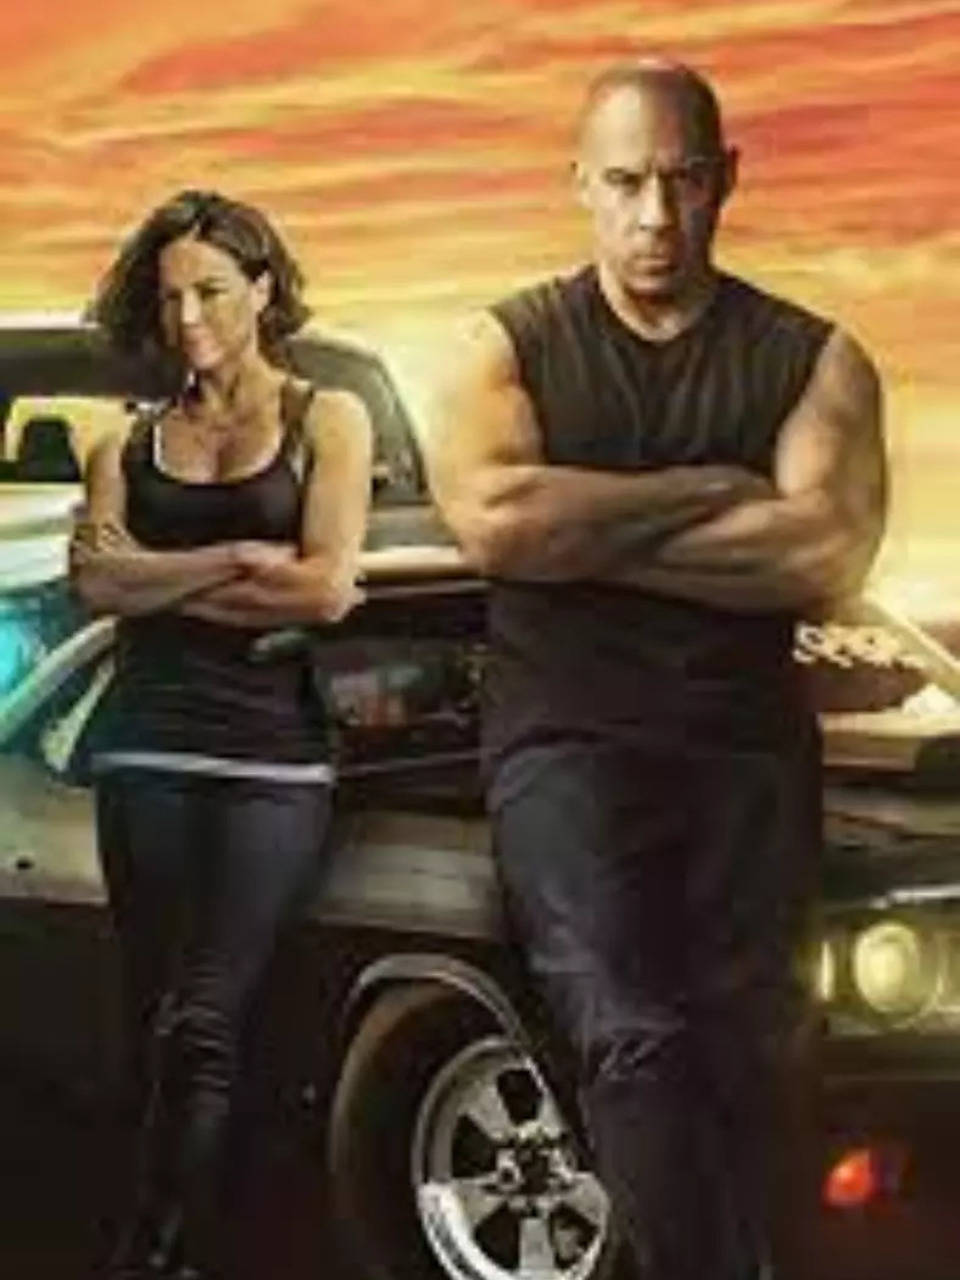 All you need to know about 'The Fast and the Furious' franchise